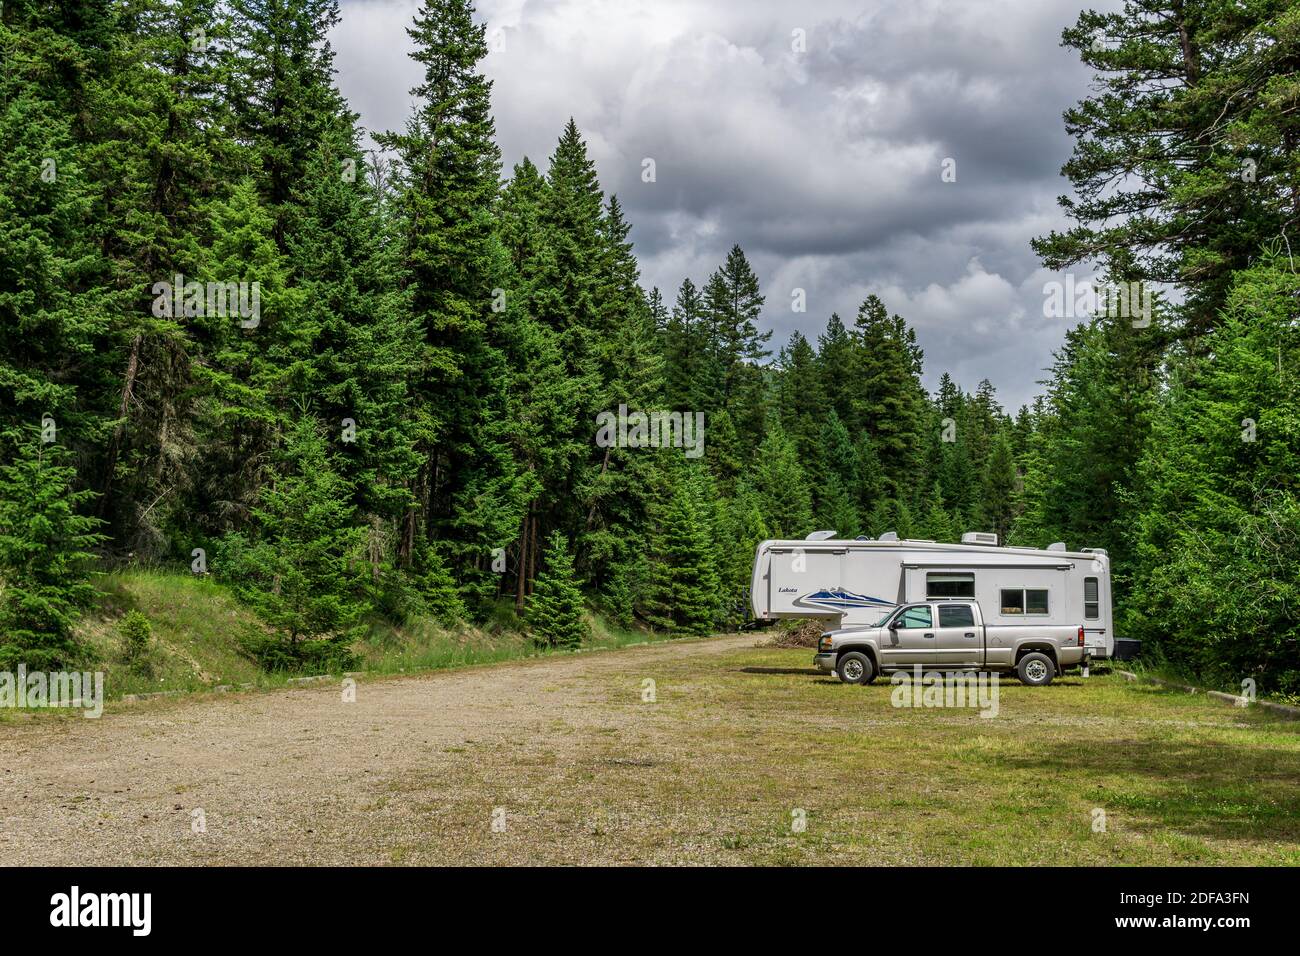 KAMLOOPS, CANADA - JULY 9, 2020: Classic Travel Trailer and truck at camping site Paul Lake Stock Photo